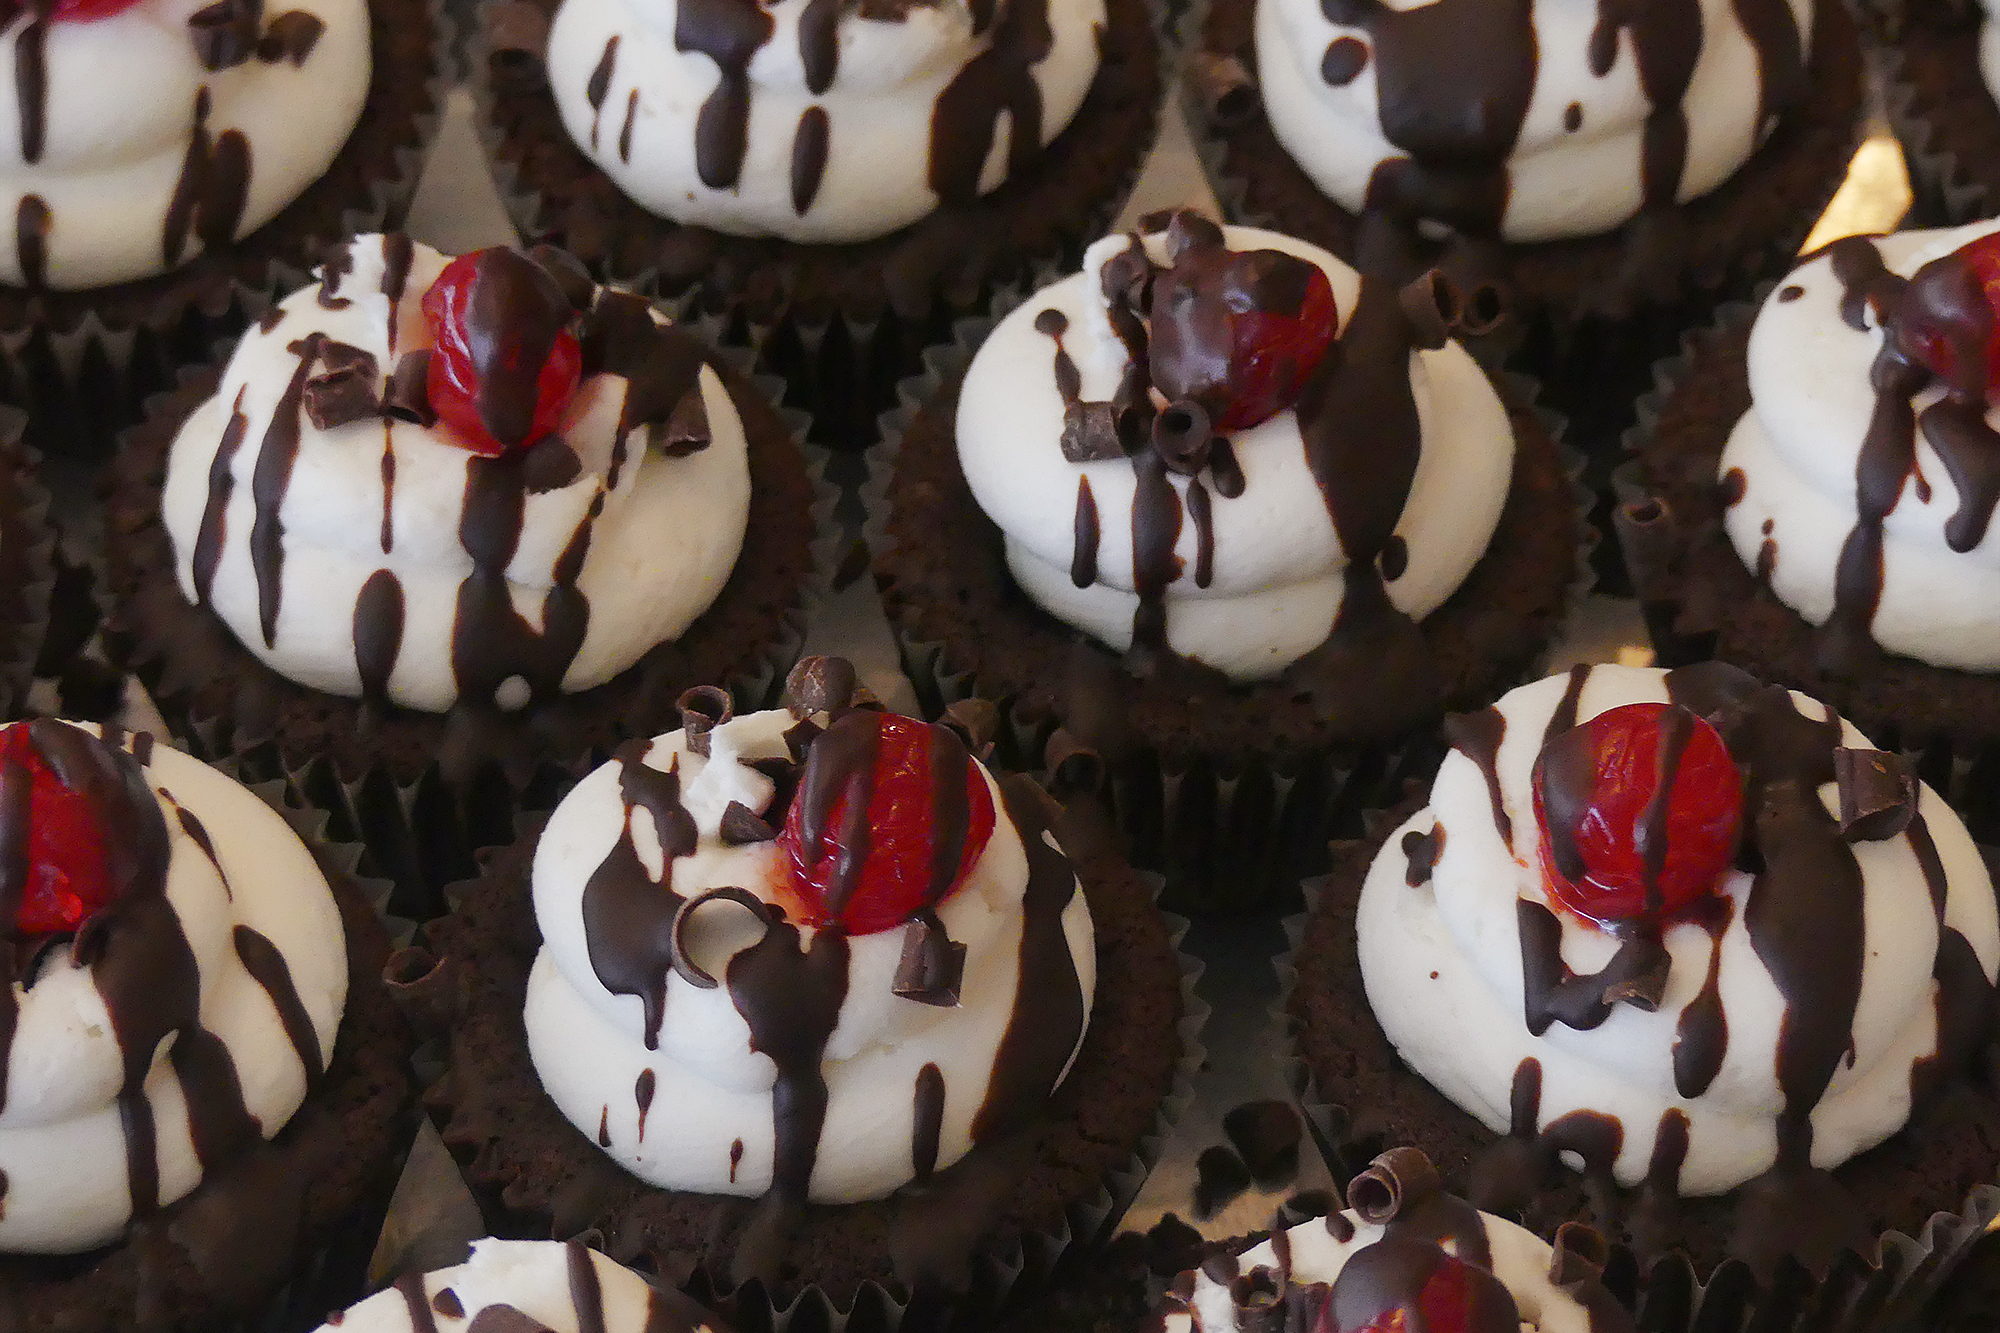 This tempting row of black forest cupcakes was available at SweetArt, a combination bakery and gallery in St. Louis, that participated in Black Restaurant Week last year.